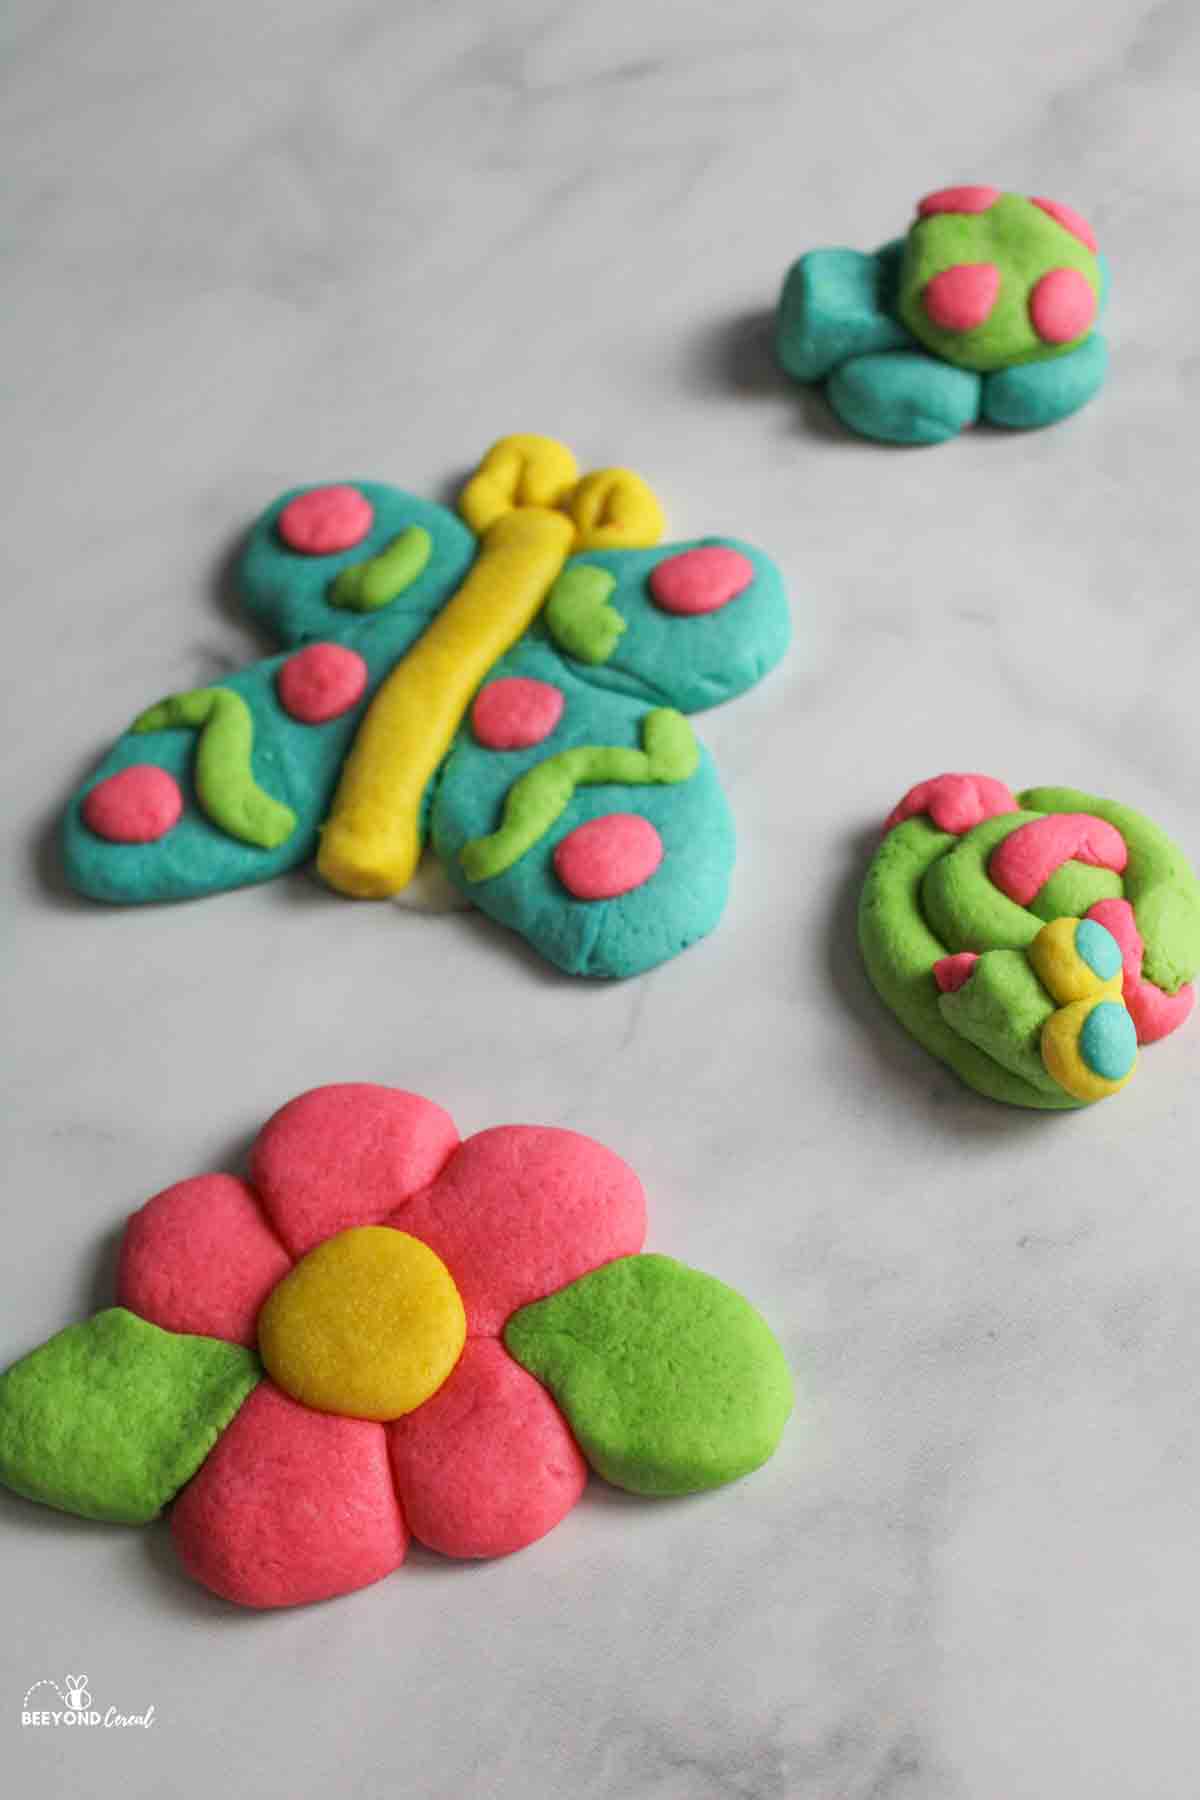 acookie shaped like a butterfly, flower, turtle, and snake